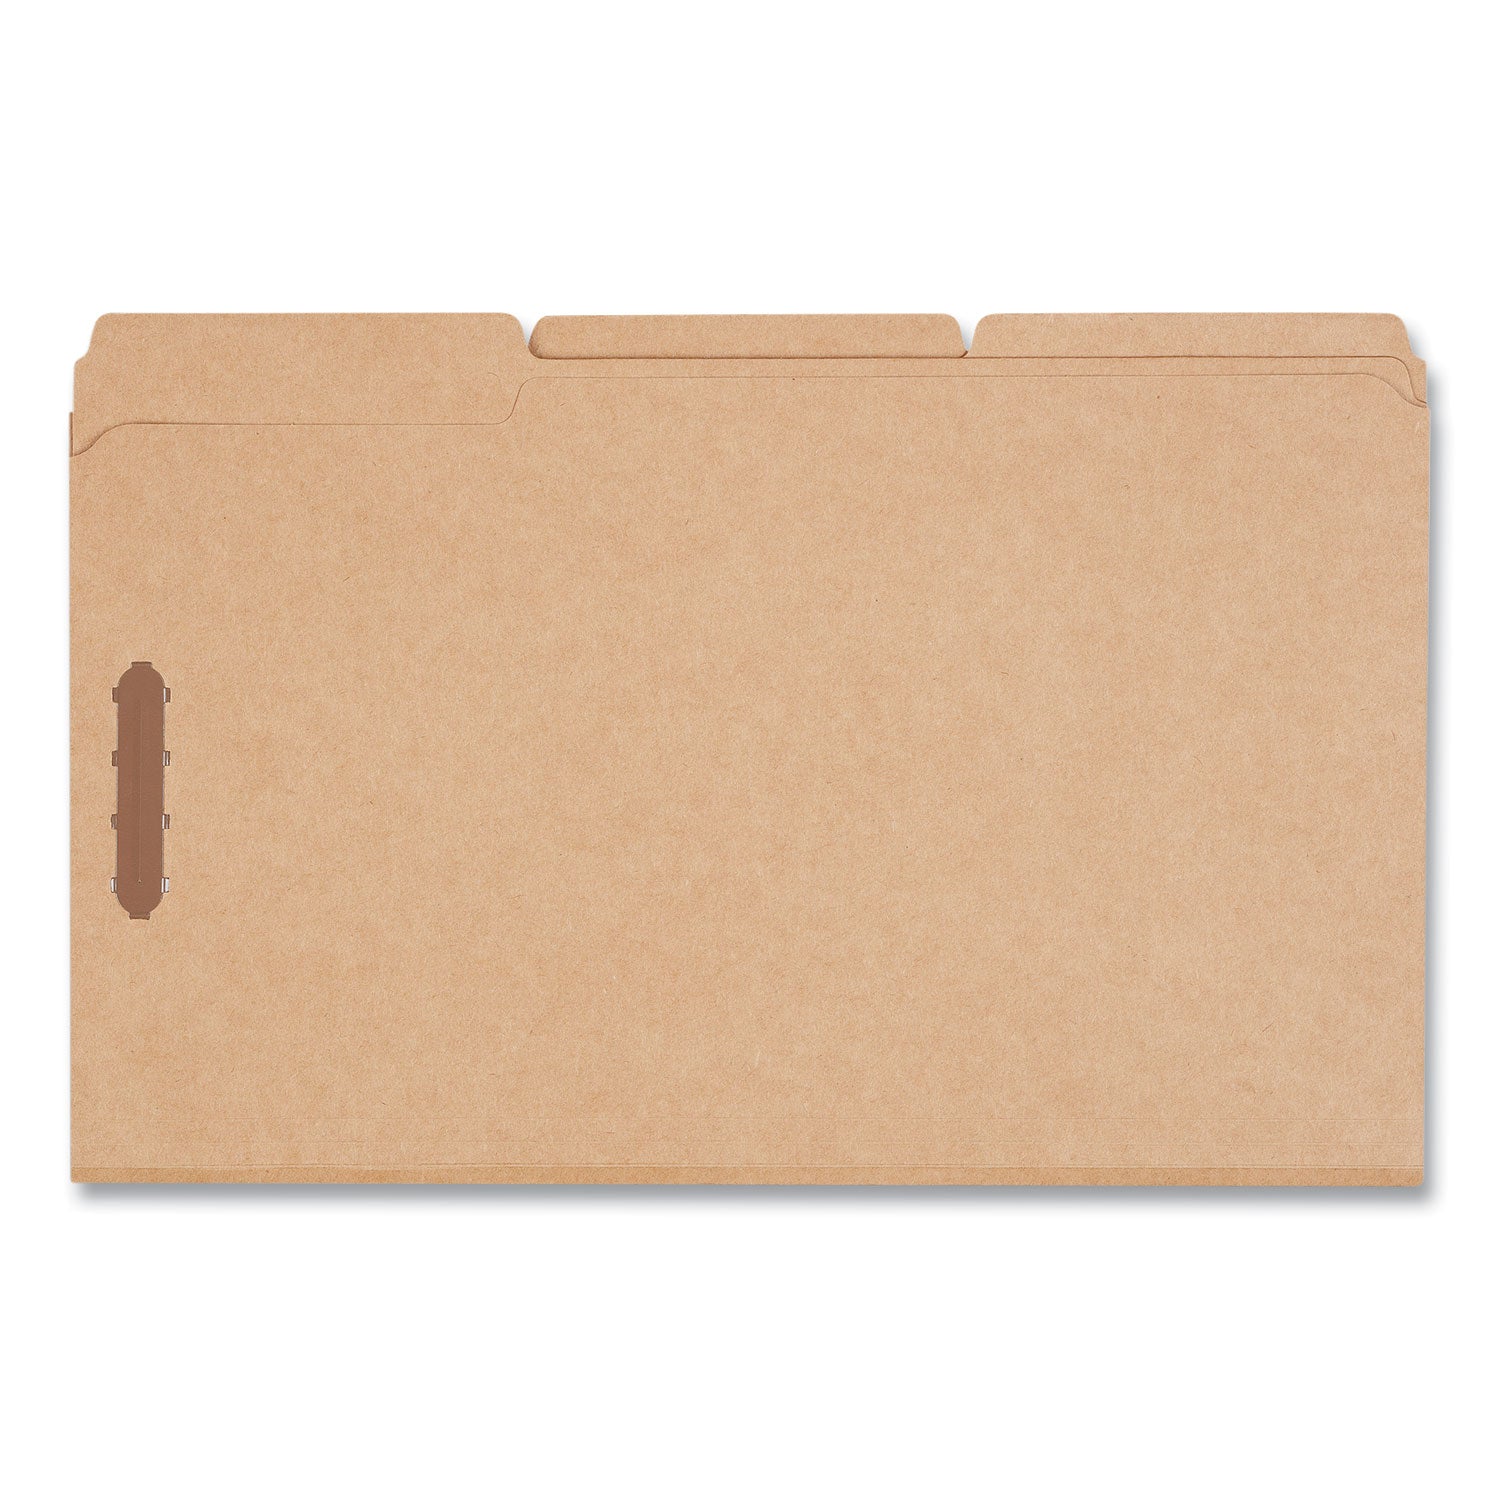 reinforced-top-tab-fastener-folders-075-expansion-2-fasteners-legal-size-brown-kraft-exterior-50-box_unv10412 - 4